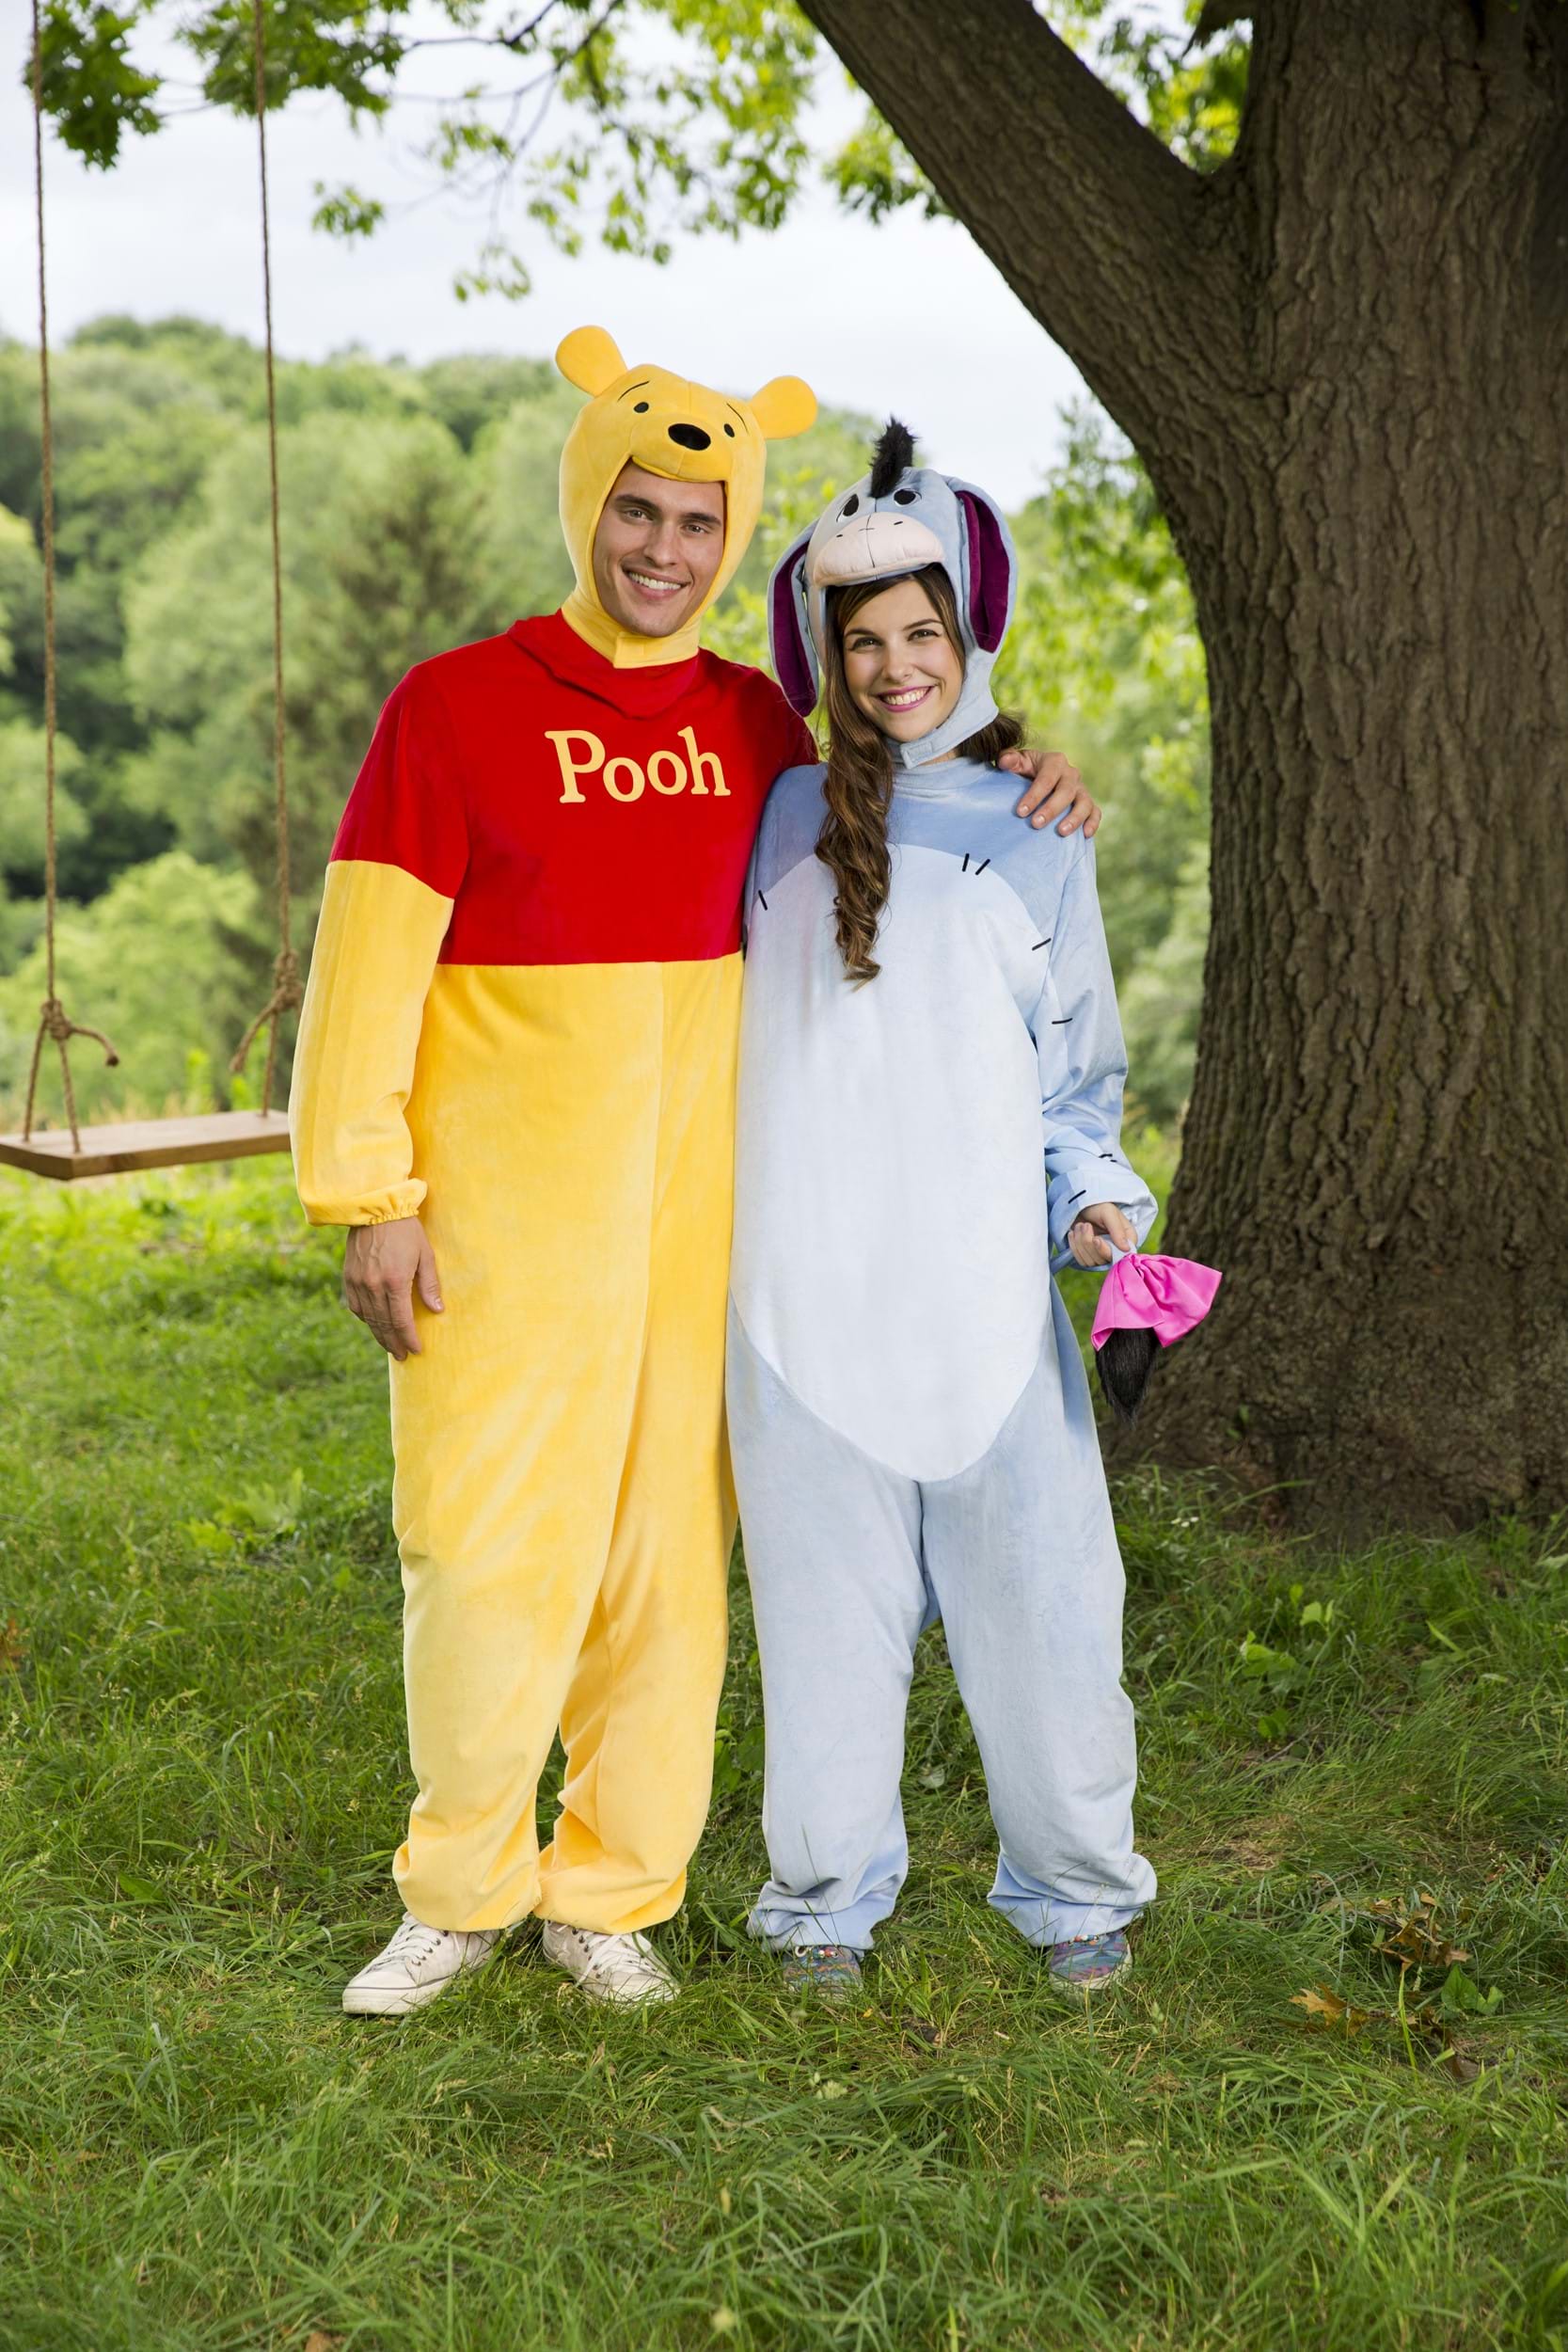 Deluxe Disney Owl Costume for Adults